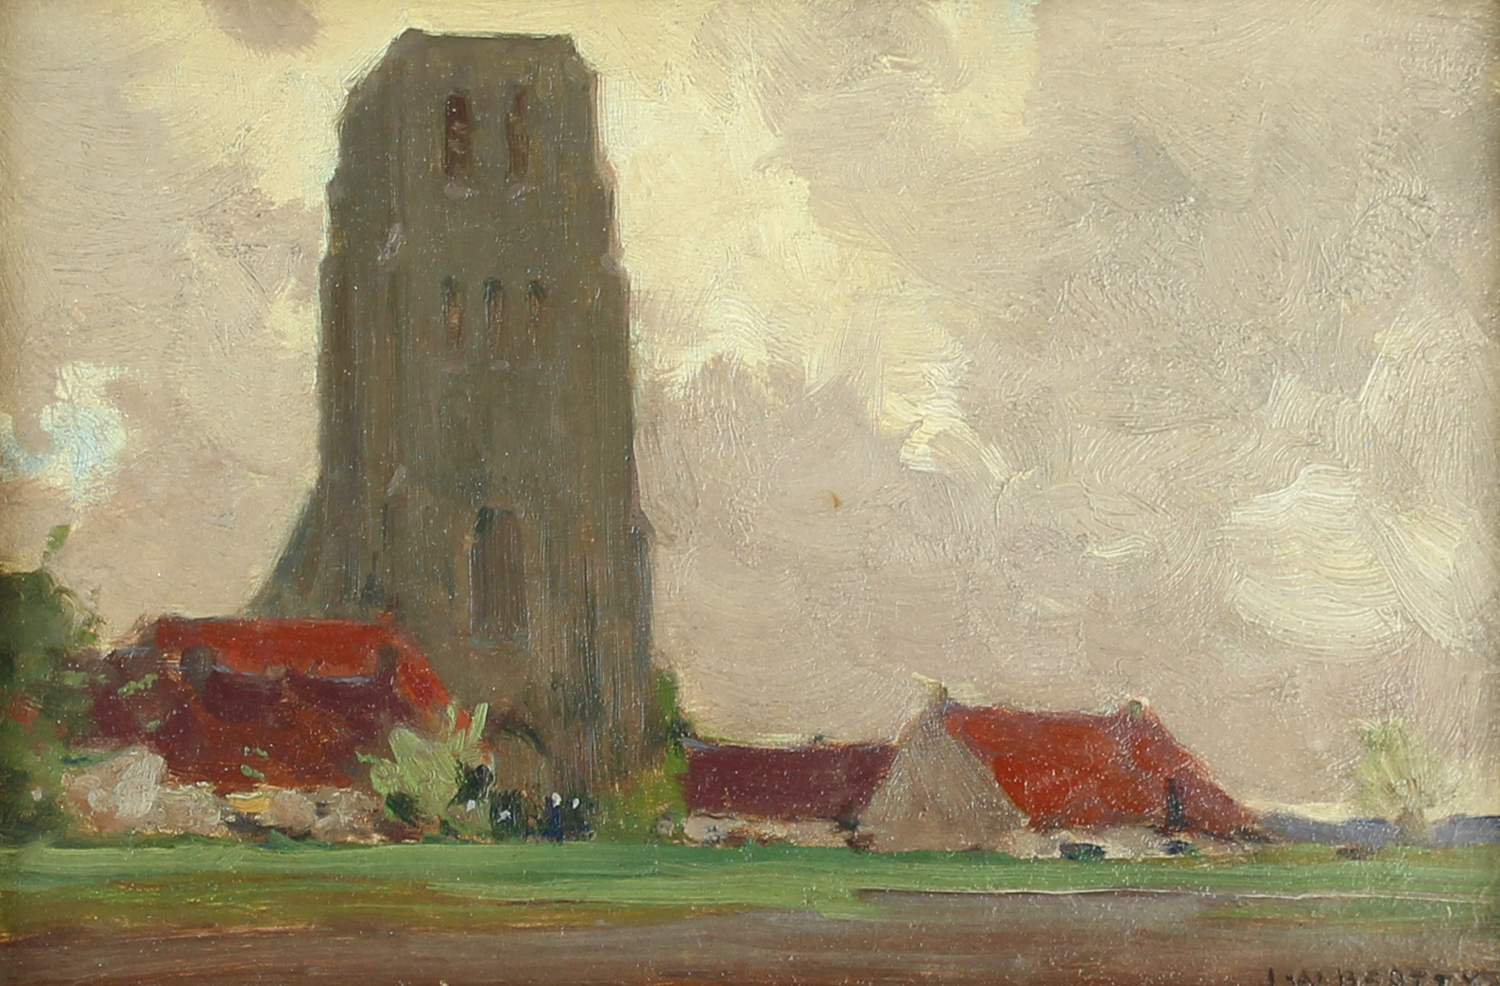 John William Beatty, Rca, Osa (Canadian 1869-1941) 'Cathedral in Flanders, Onze-Lieve-Vrouwekerk, In Lissewege'